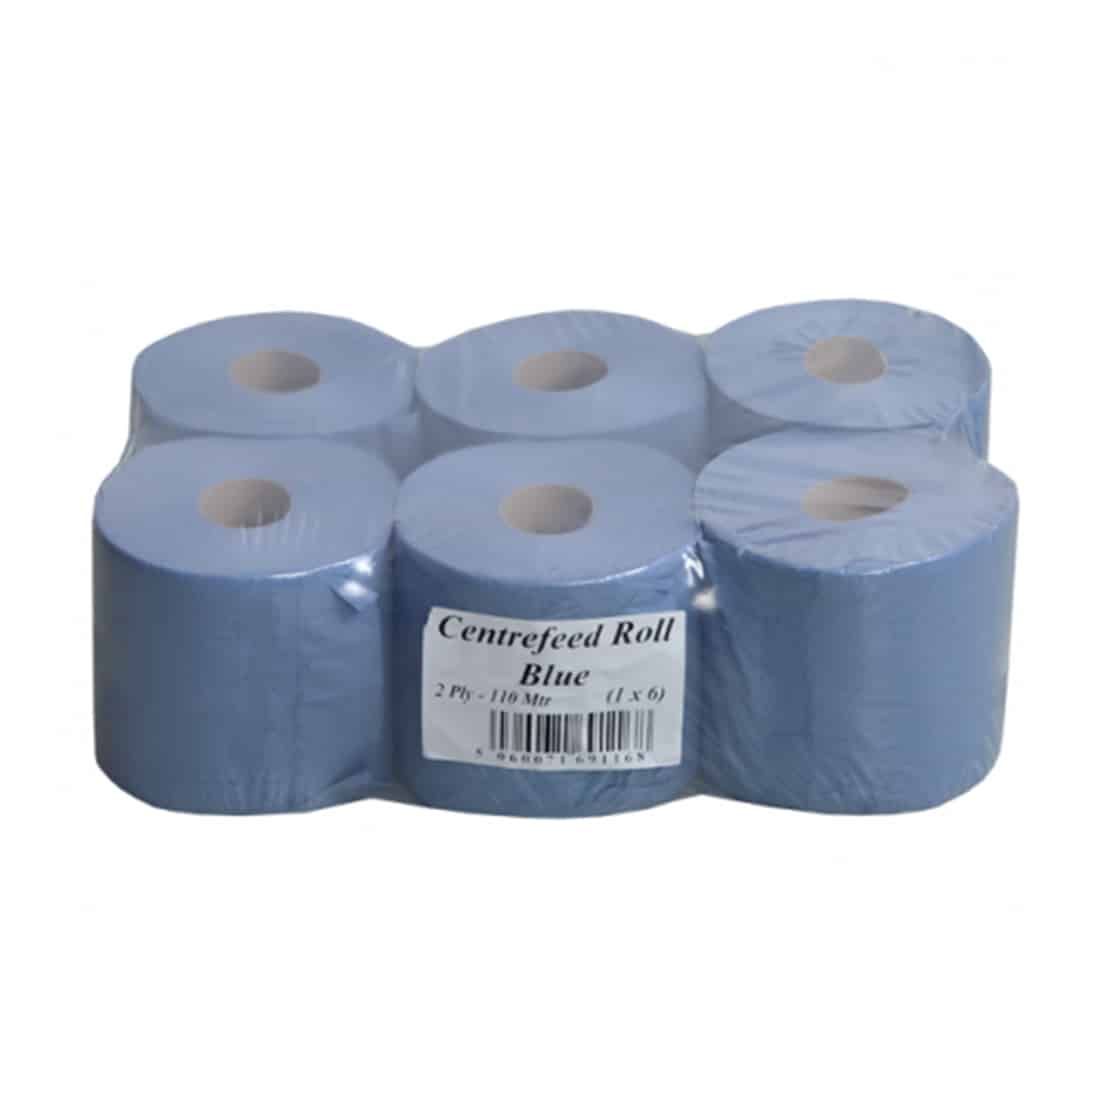 Blue Centre Feed Wiper Rolls 6/Pack